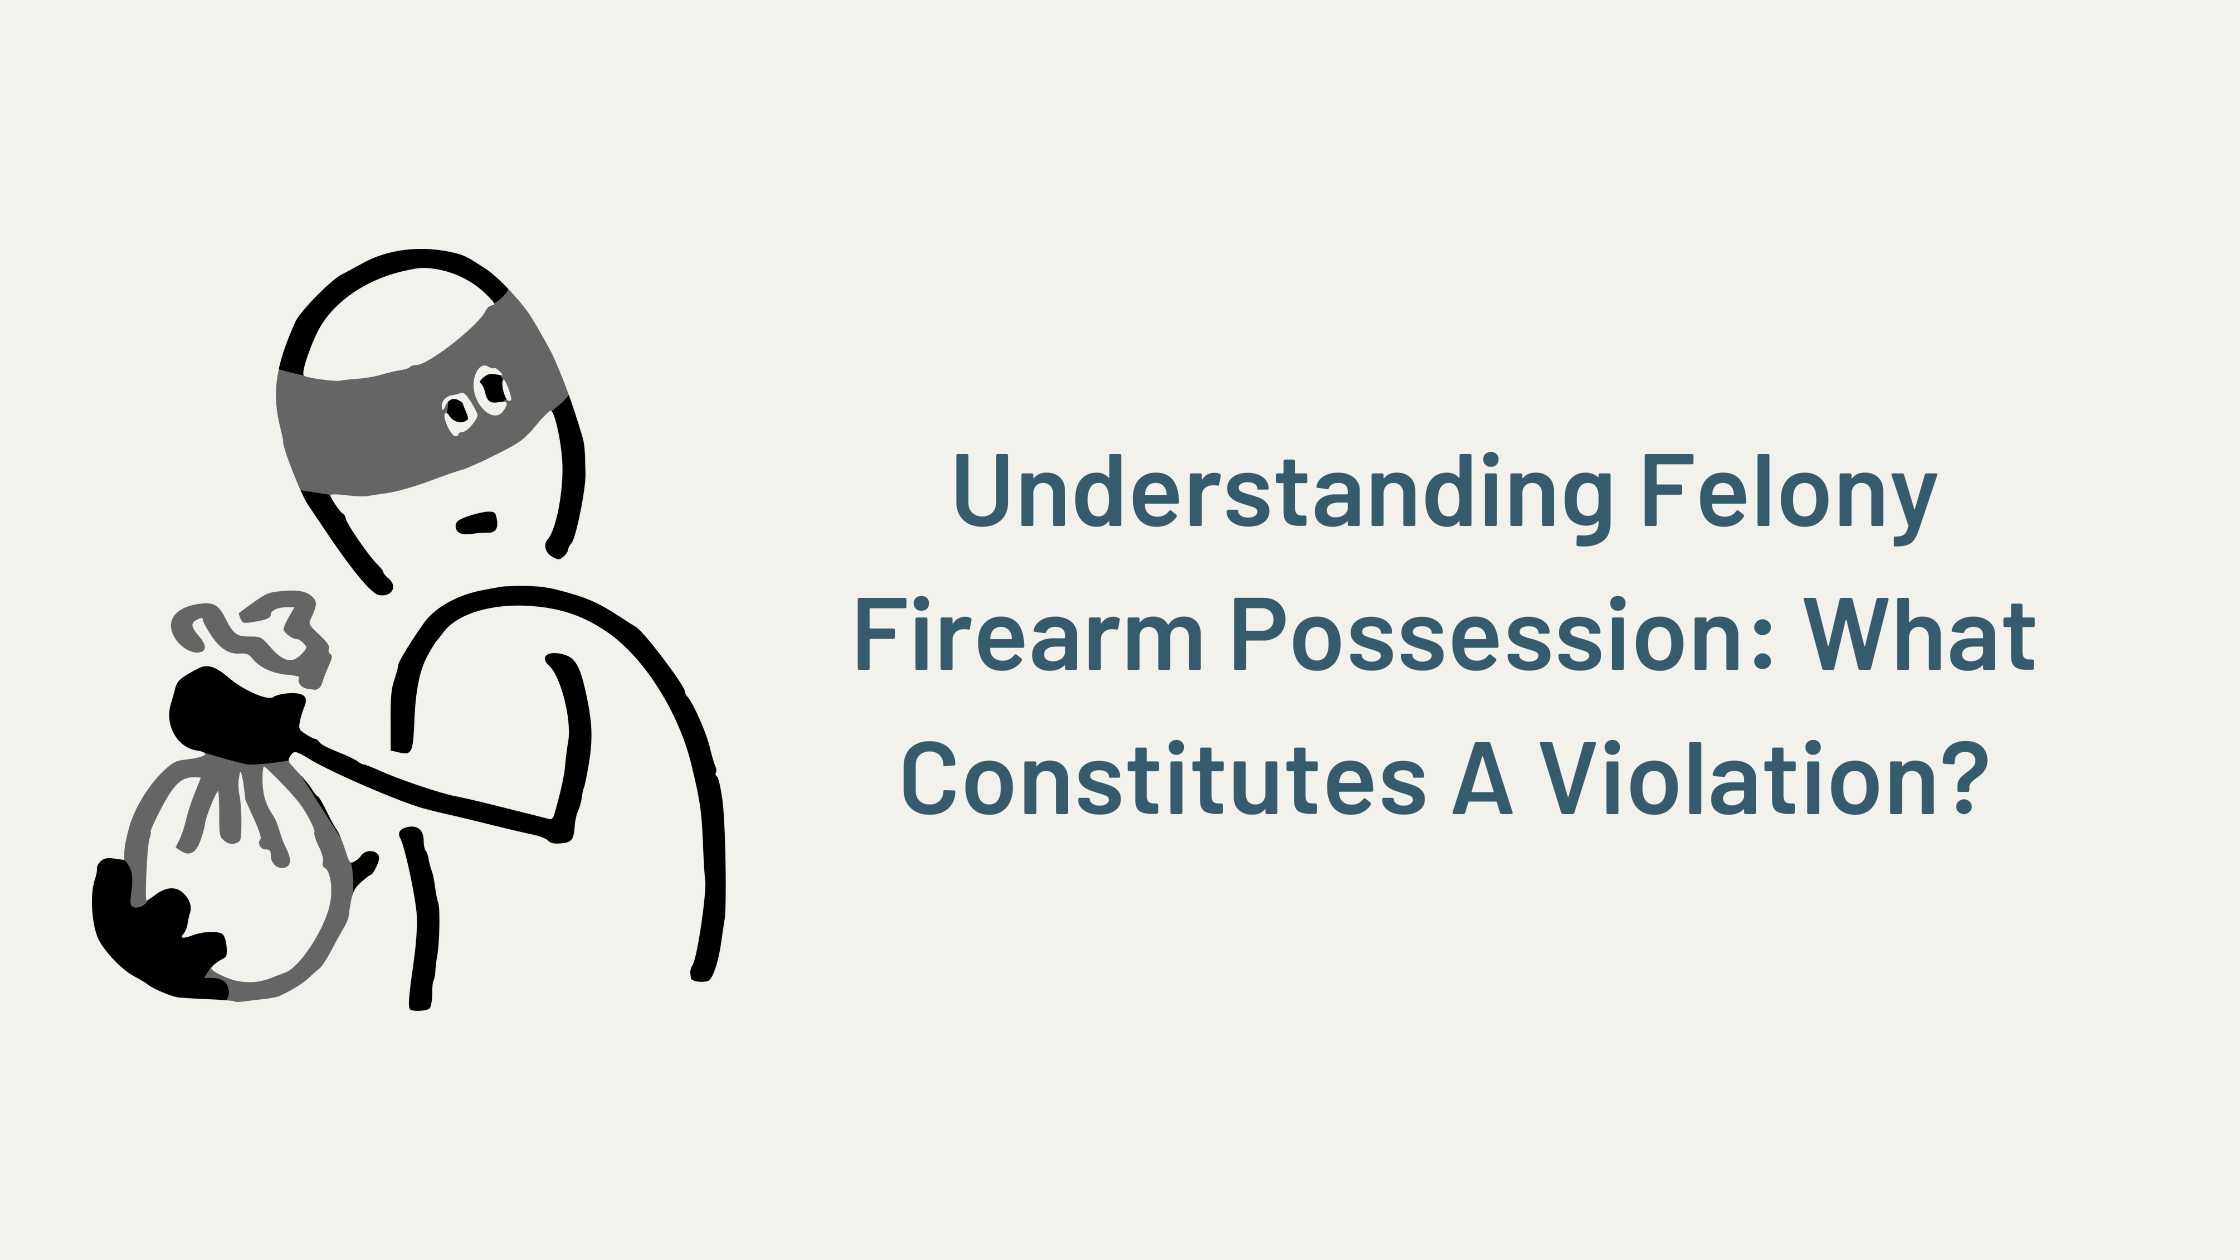 Understanding Felony Firearm Possession: What Constitutes A Violation?